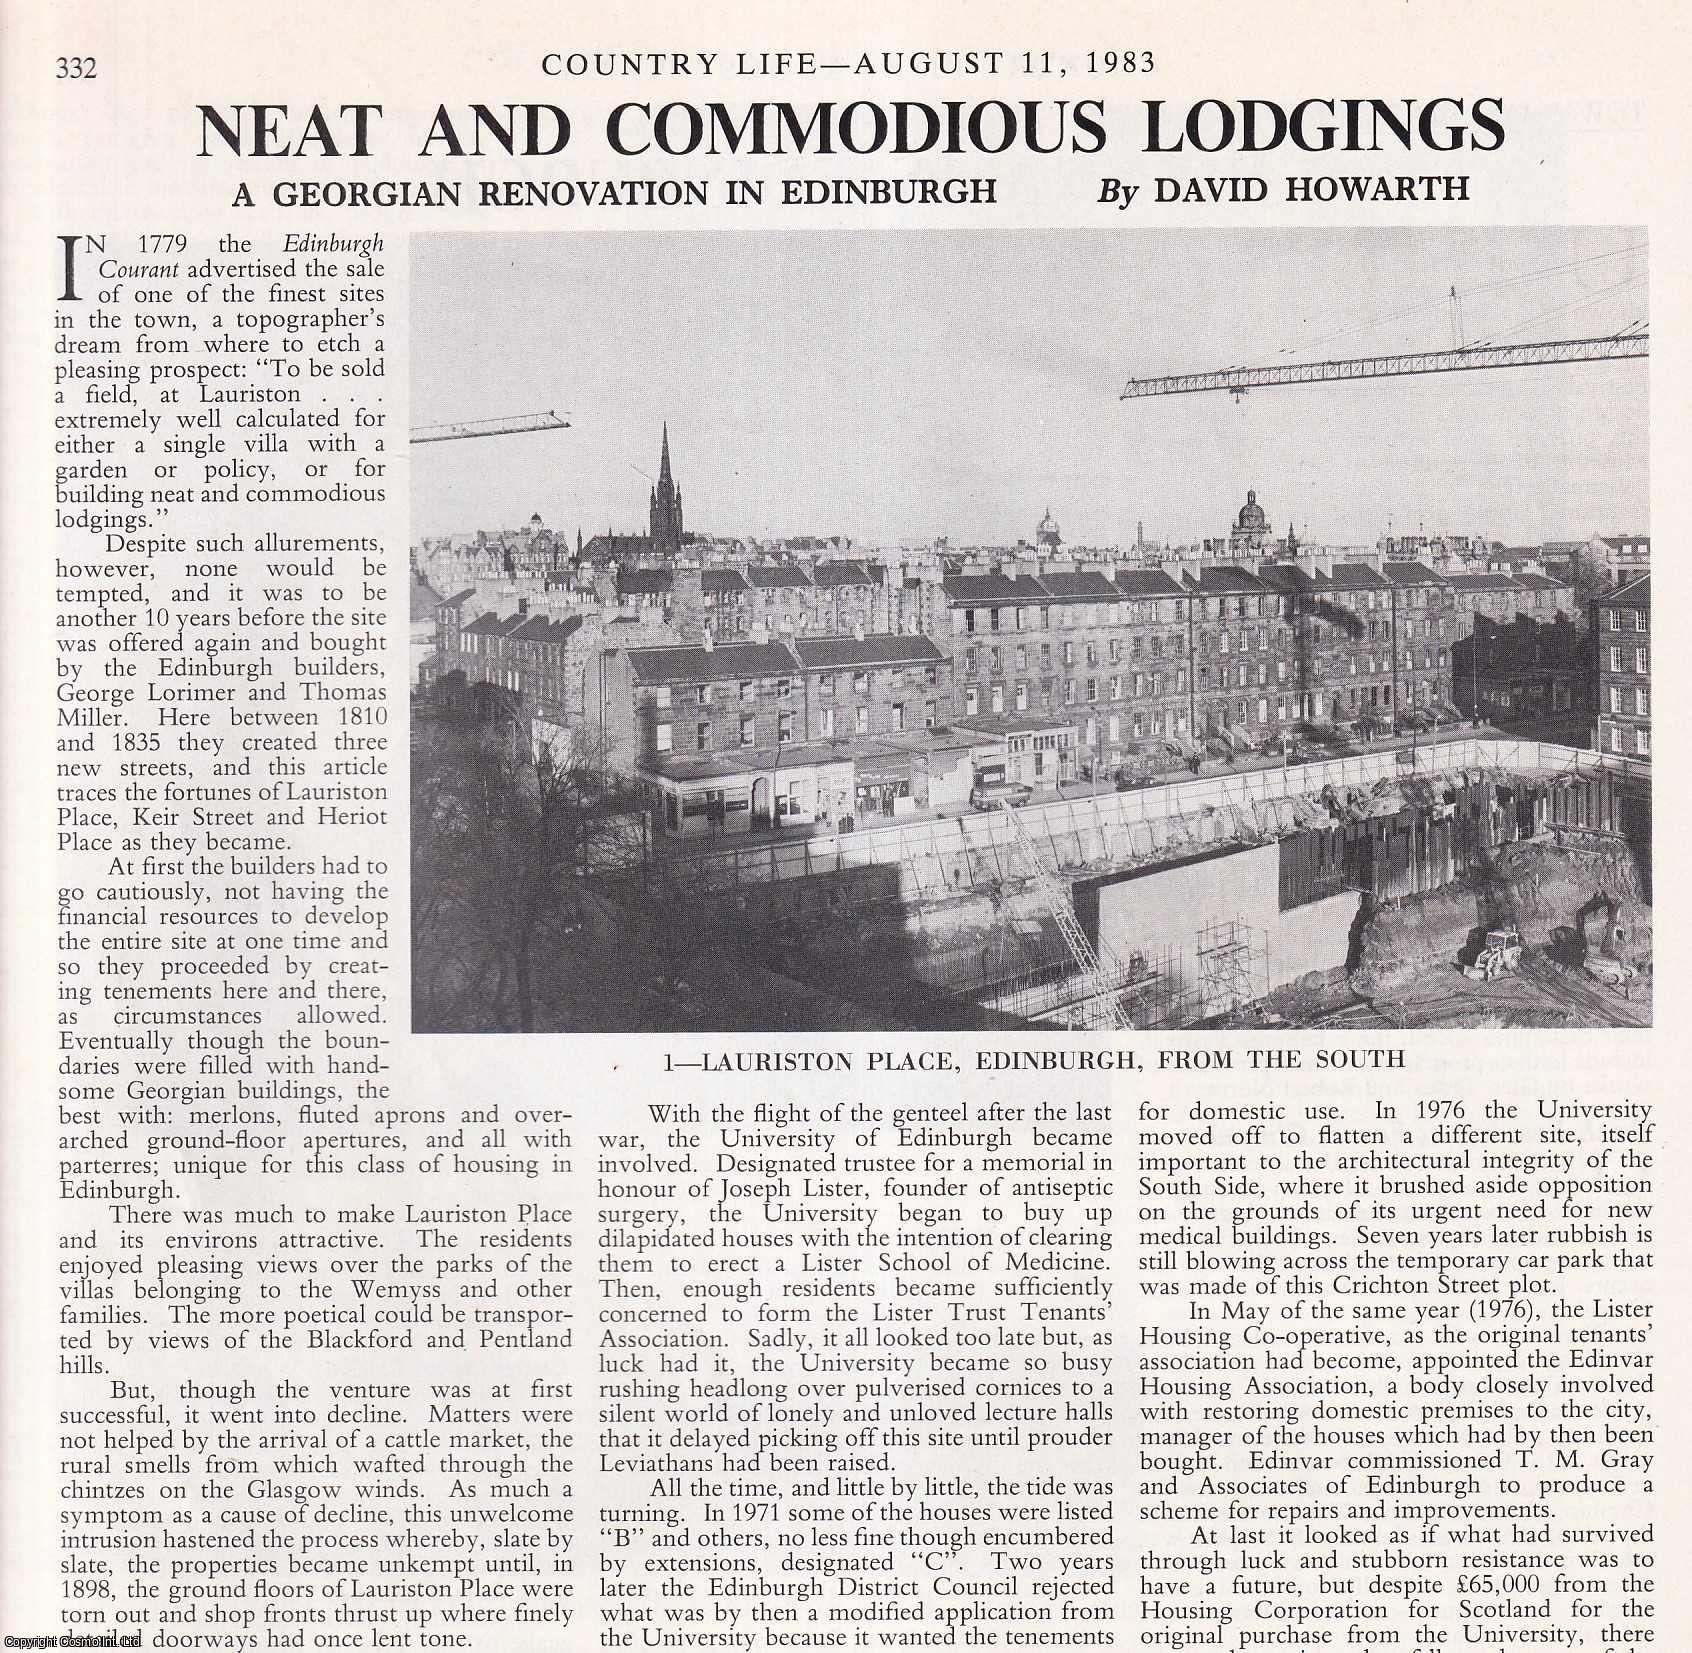 David Howarth - Lauriston Place, Heriot Place and Keir Street: A Georgian Renovation in Edinburgh. Several pictures and accompanying text, removed from an original issue of Country Life Magazine, 1983.